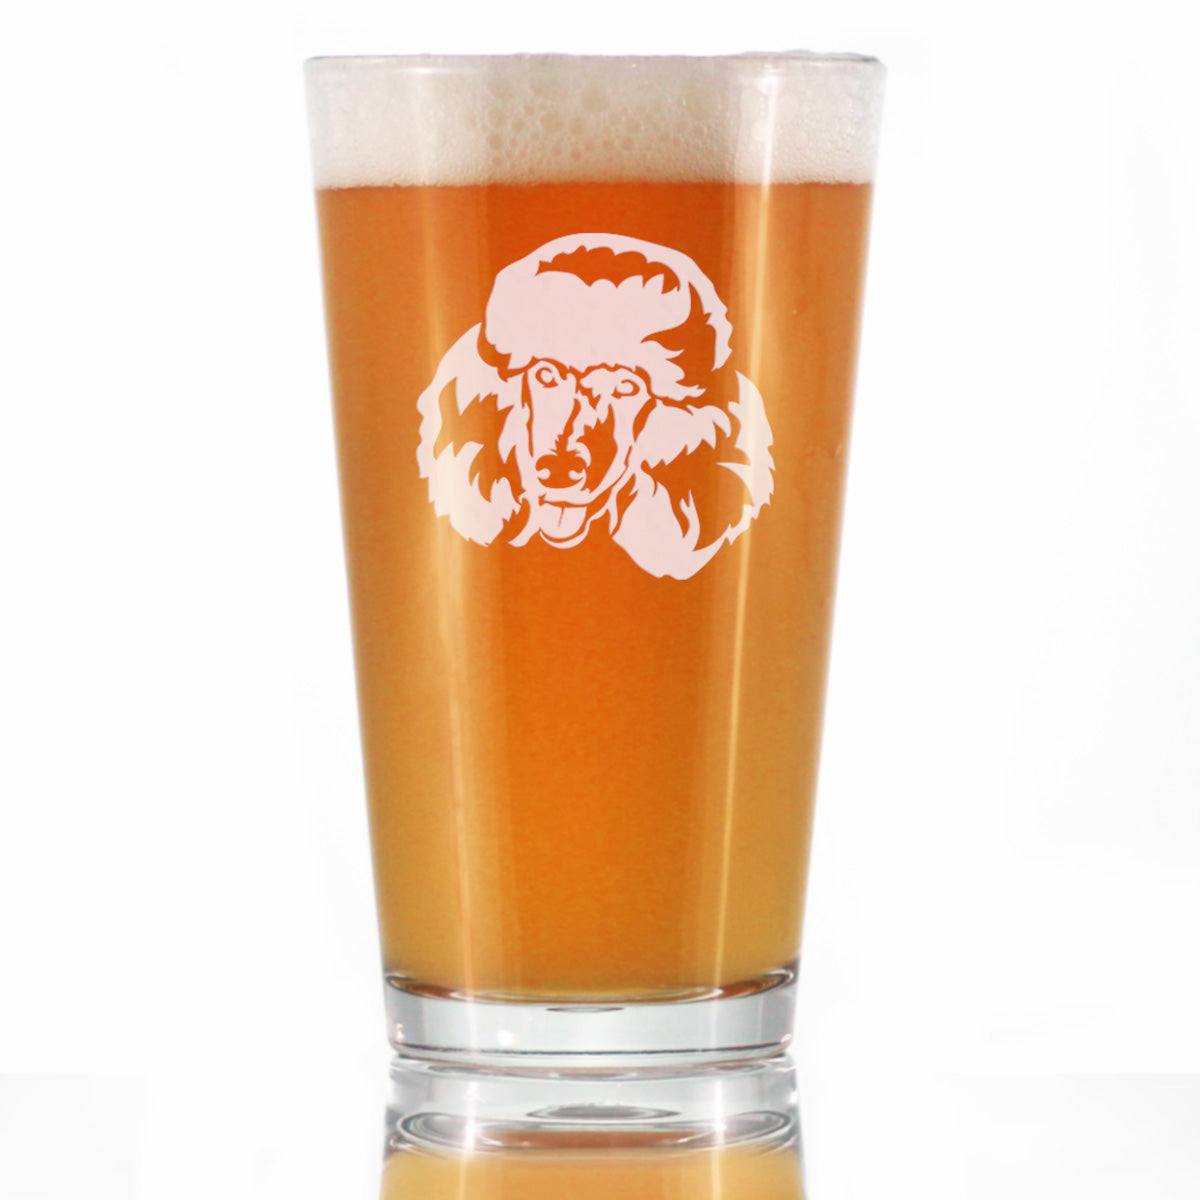 Happy Poodle - Pint Glass for Beer - Fun Unique Cute Poodle Themed Dog Gifts and Party Decor for Women and Men - 16 oz